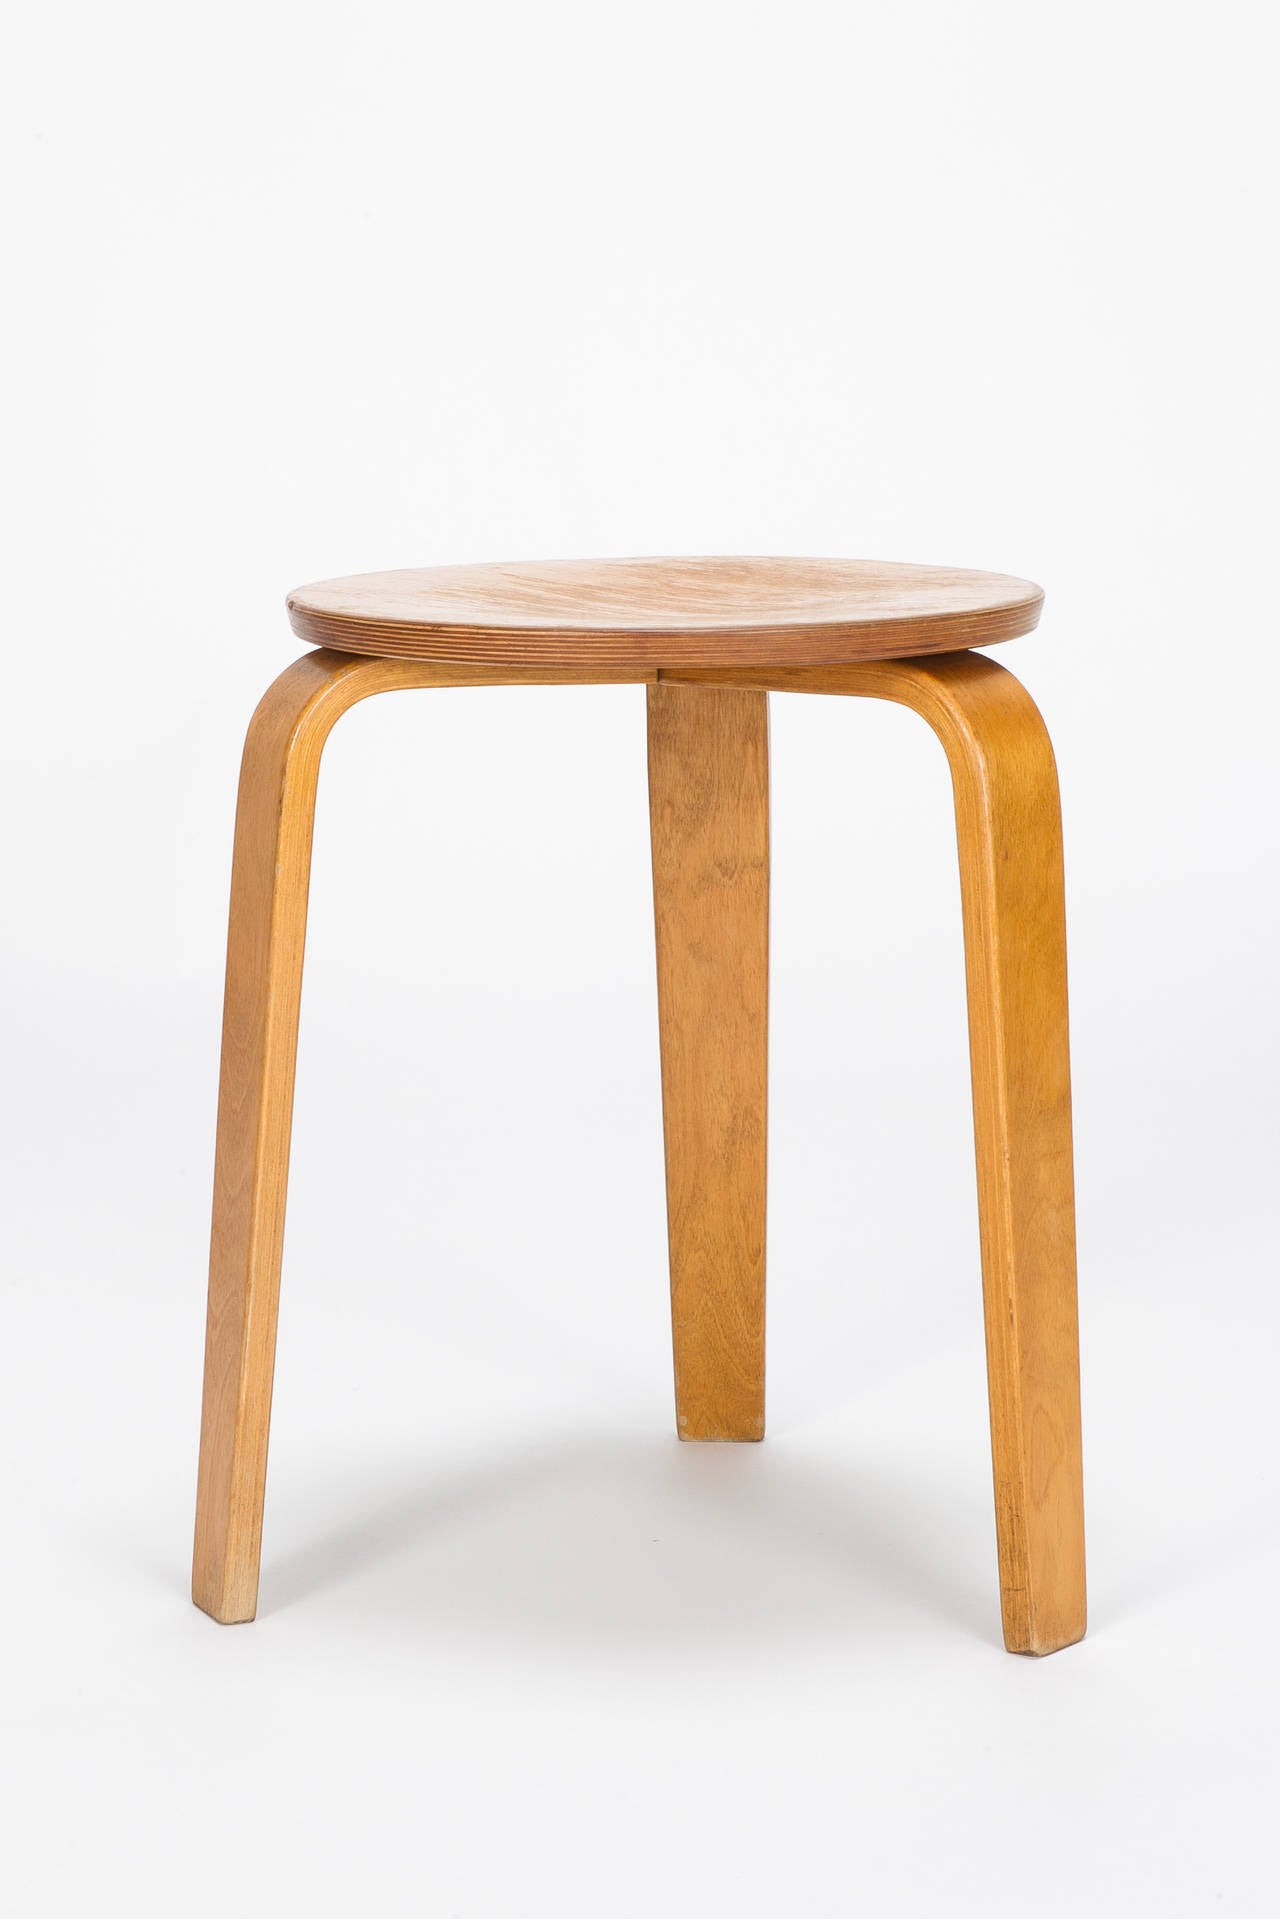 Wonderful and classical Hans Bellmann stool for Horgen-Glarus manufactured in 1962 in Switzerland, made of birch wood with a wonderful vintage patina. All original screws and Horgen-Glarus sticker!